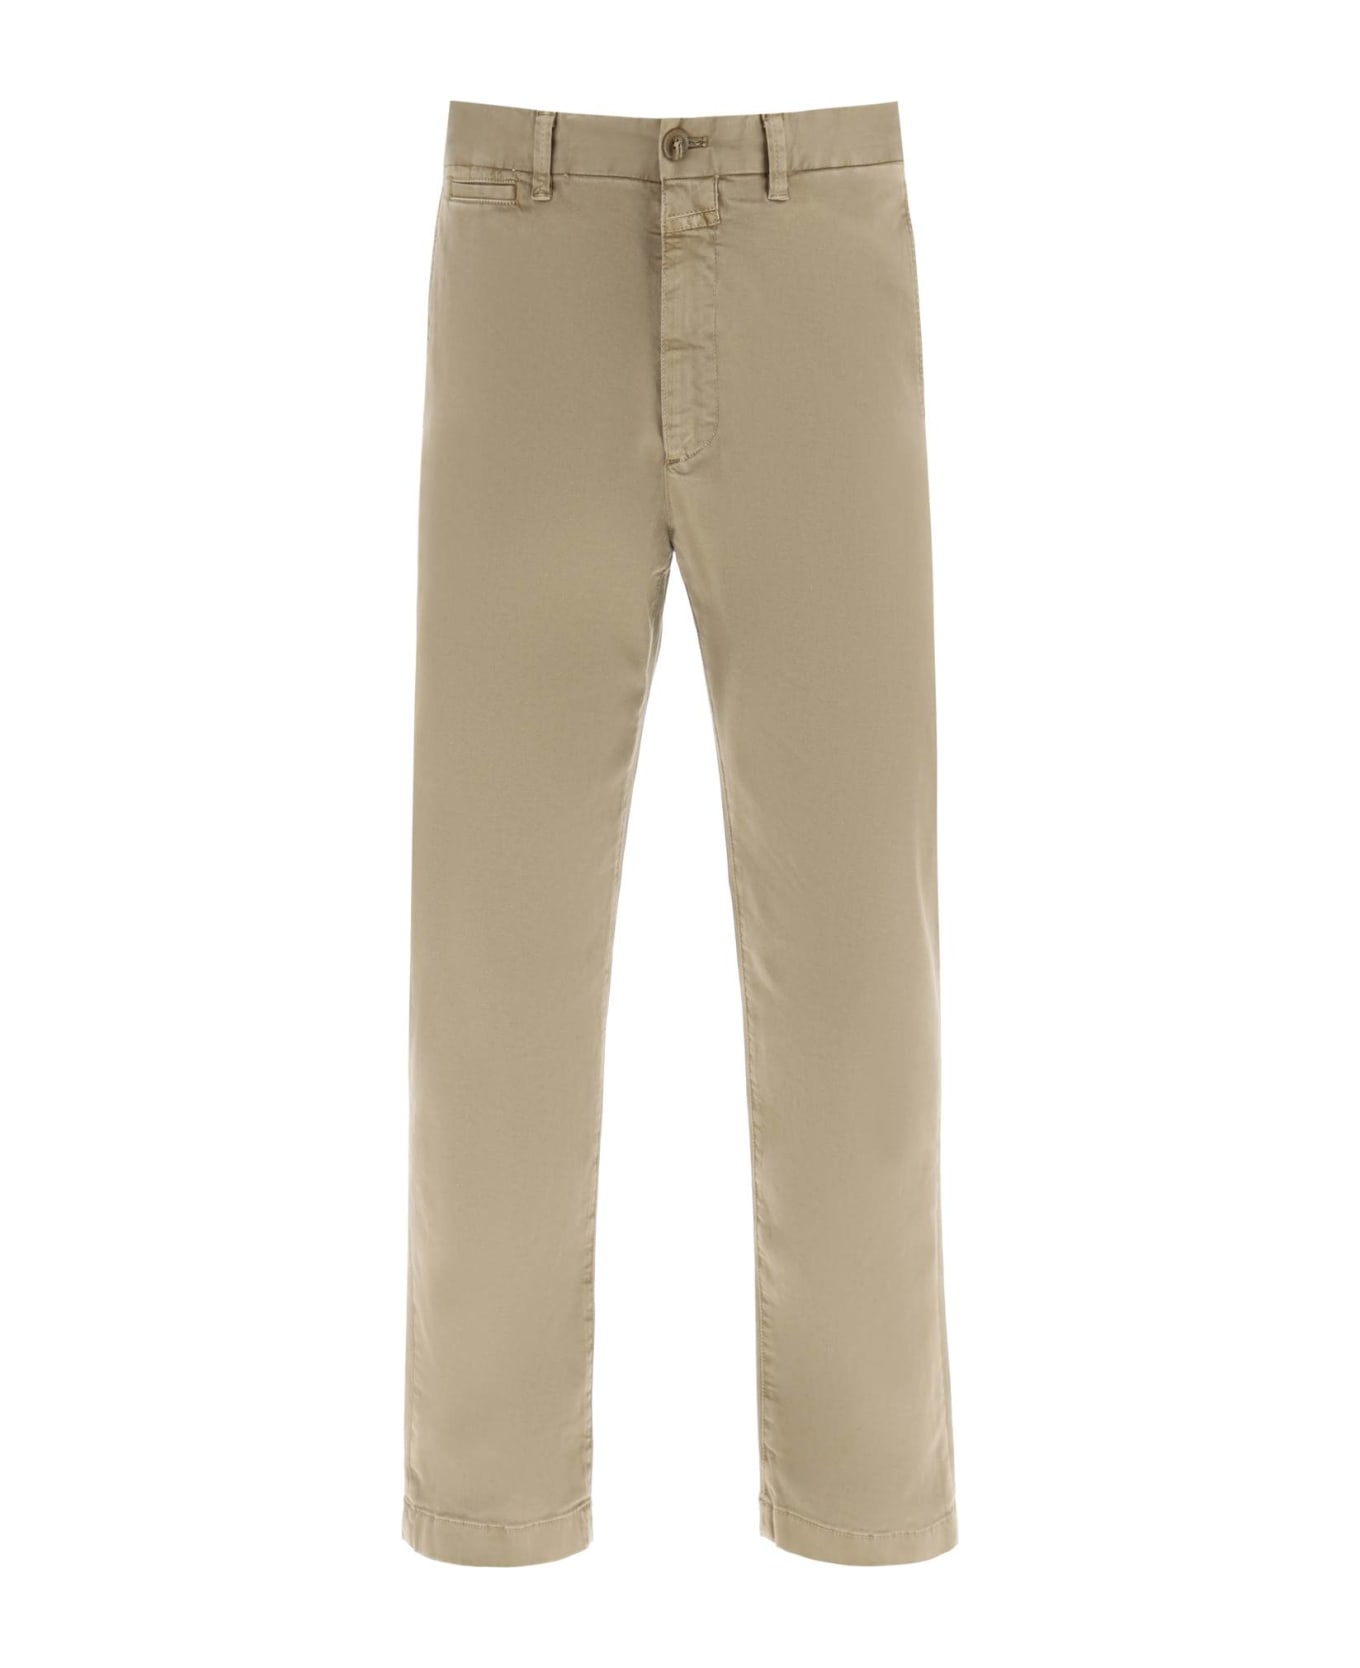 Closed 'tacoma' Tapered Pants - AFRICAN SAND (Beige)